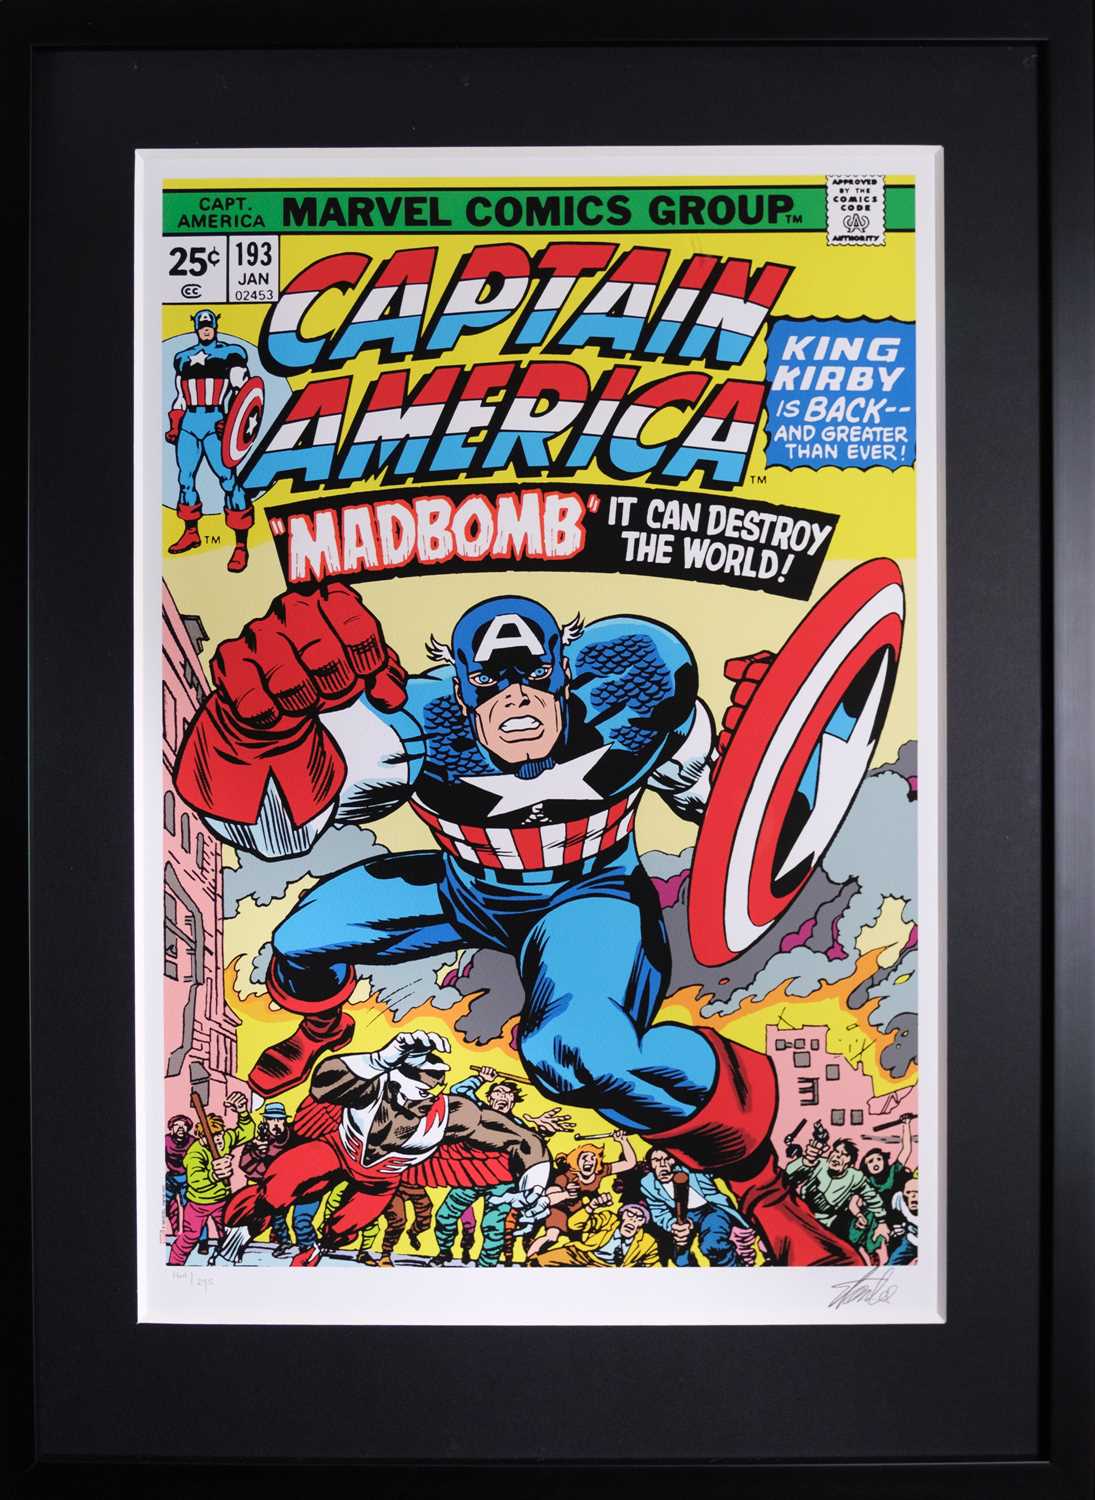 (Signed) Stan LEE (1922-2018) Captain America #193 - Madbomb (2016) - Image 2 of 5